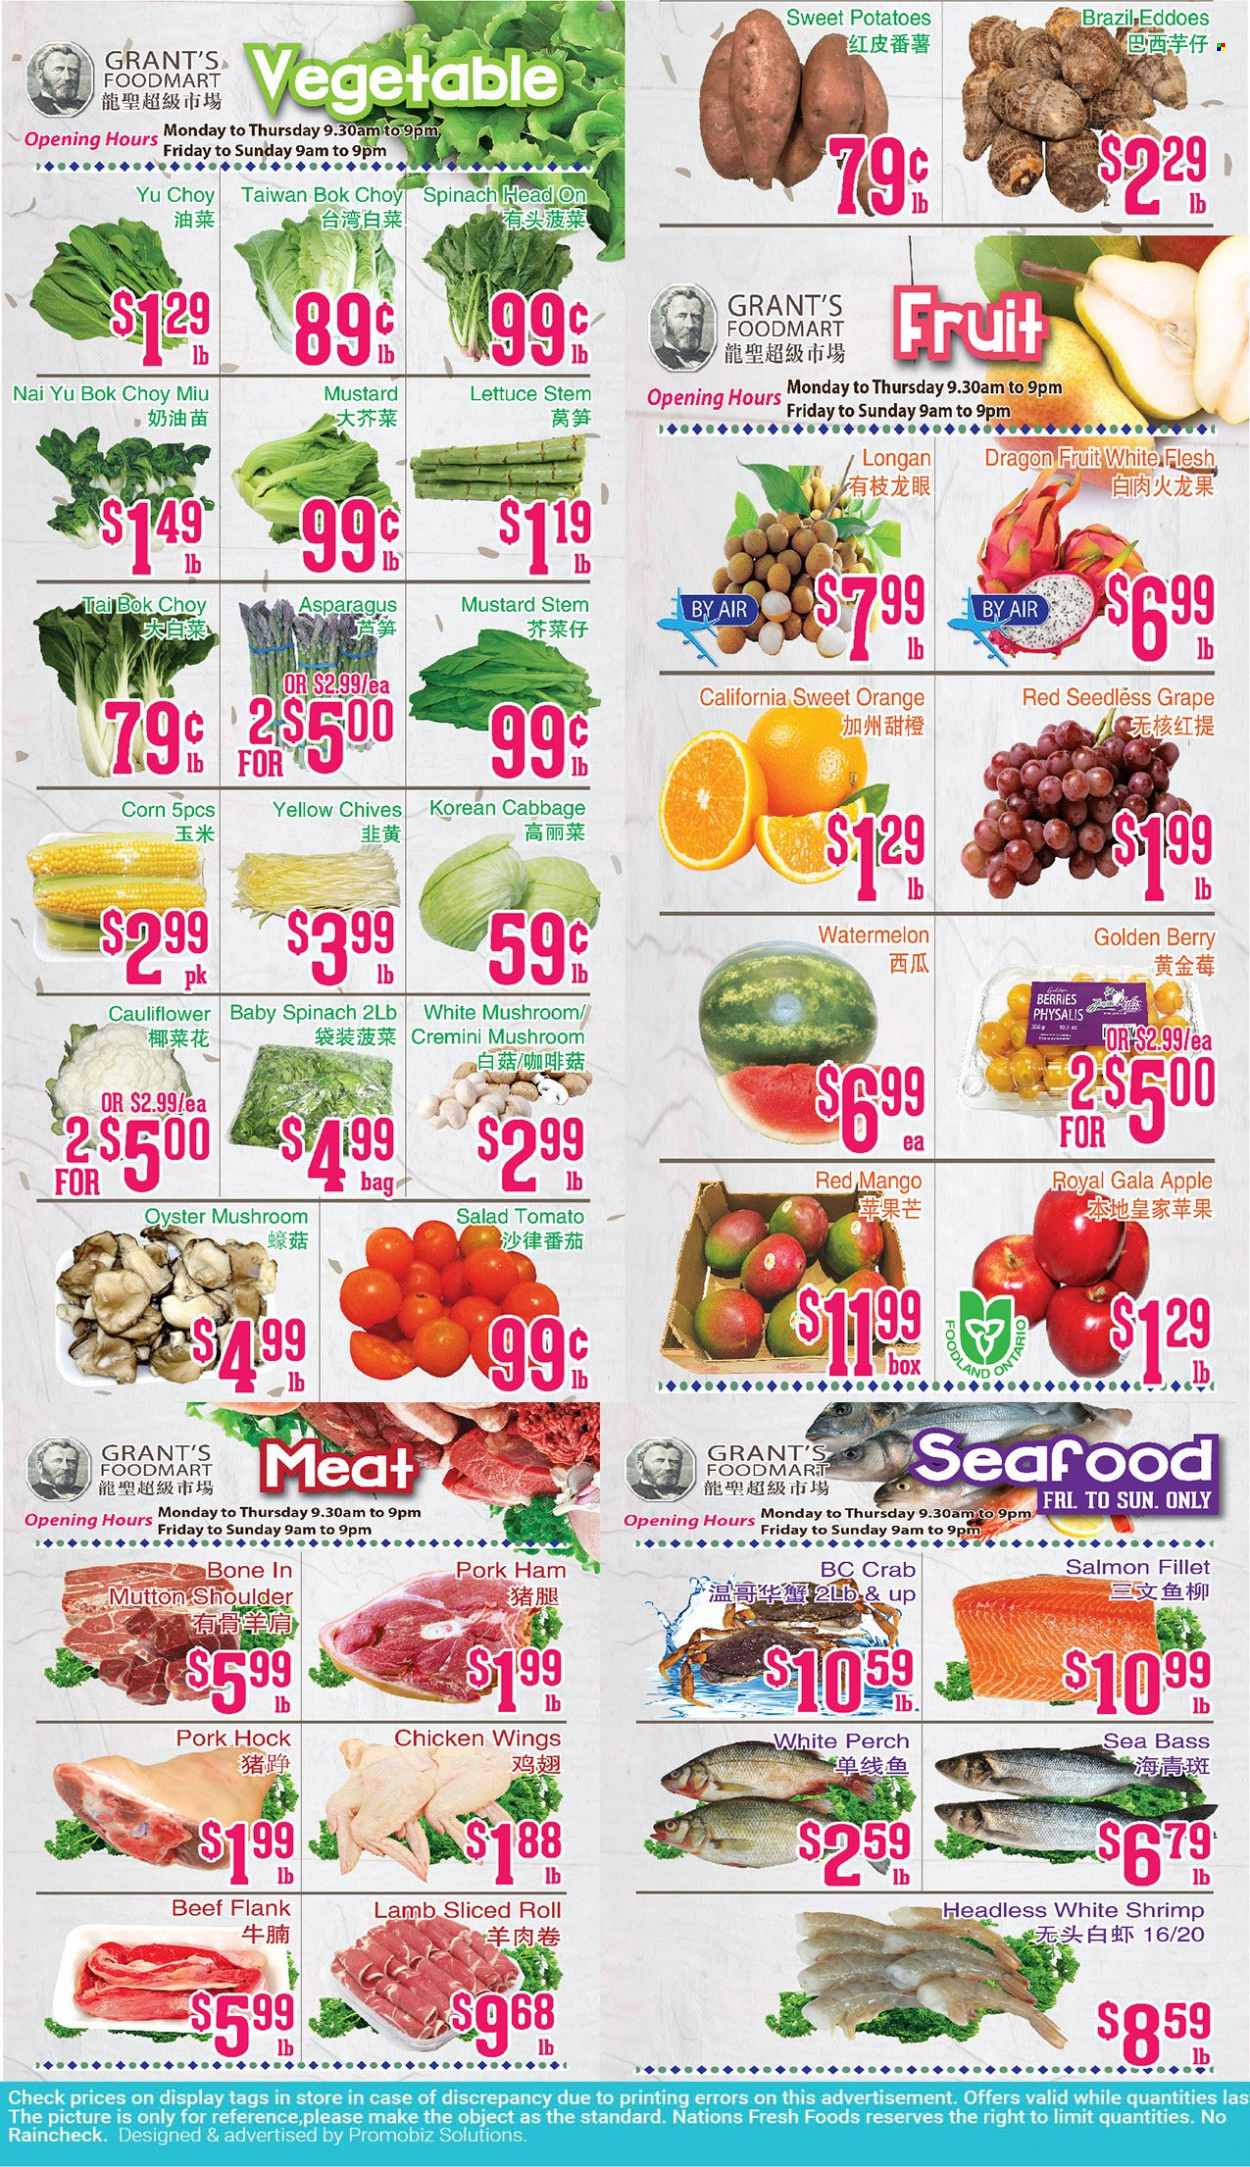 thumbnail - Grant's Foodmart Flyer - March 24, 2023 - March 30, 2023 - Sales products - oyster mushrooms, mushrooms, asparagus, bok choy, cabbage, cauliflower, corn, spinach, sweet potato, potatoes, lettuce, salad, chives, Gala, mango, watermelon, oranges, dragon fruit, salmon, salmon fillet, sea bass, perch, oysters, seafood, crab, shrimps, ham, chicken wings, mustard, Grant's, chicken, pork hock, pork meat, mutton meat. Page 1.